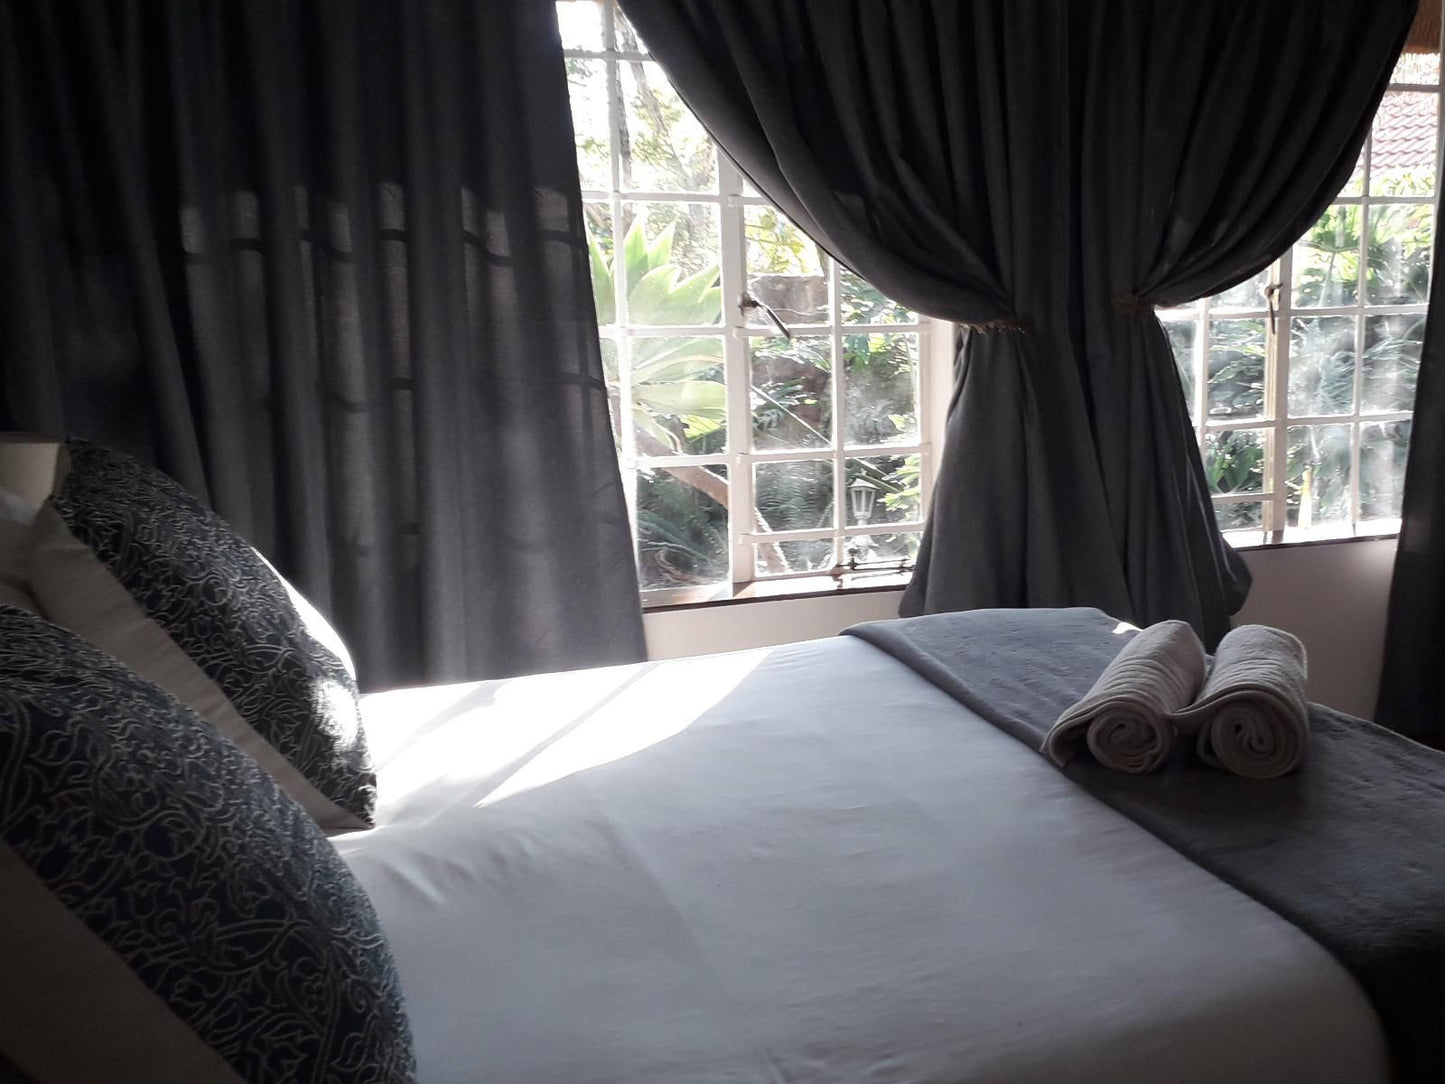 El Shadai Guest House Thabazimbi Thabazimbi Limpopo Province South Africa Unsaturated, Bedroom